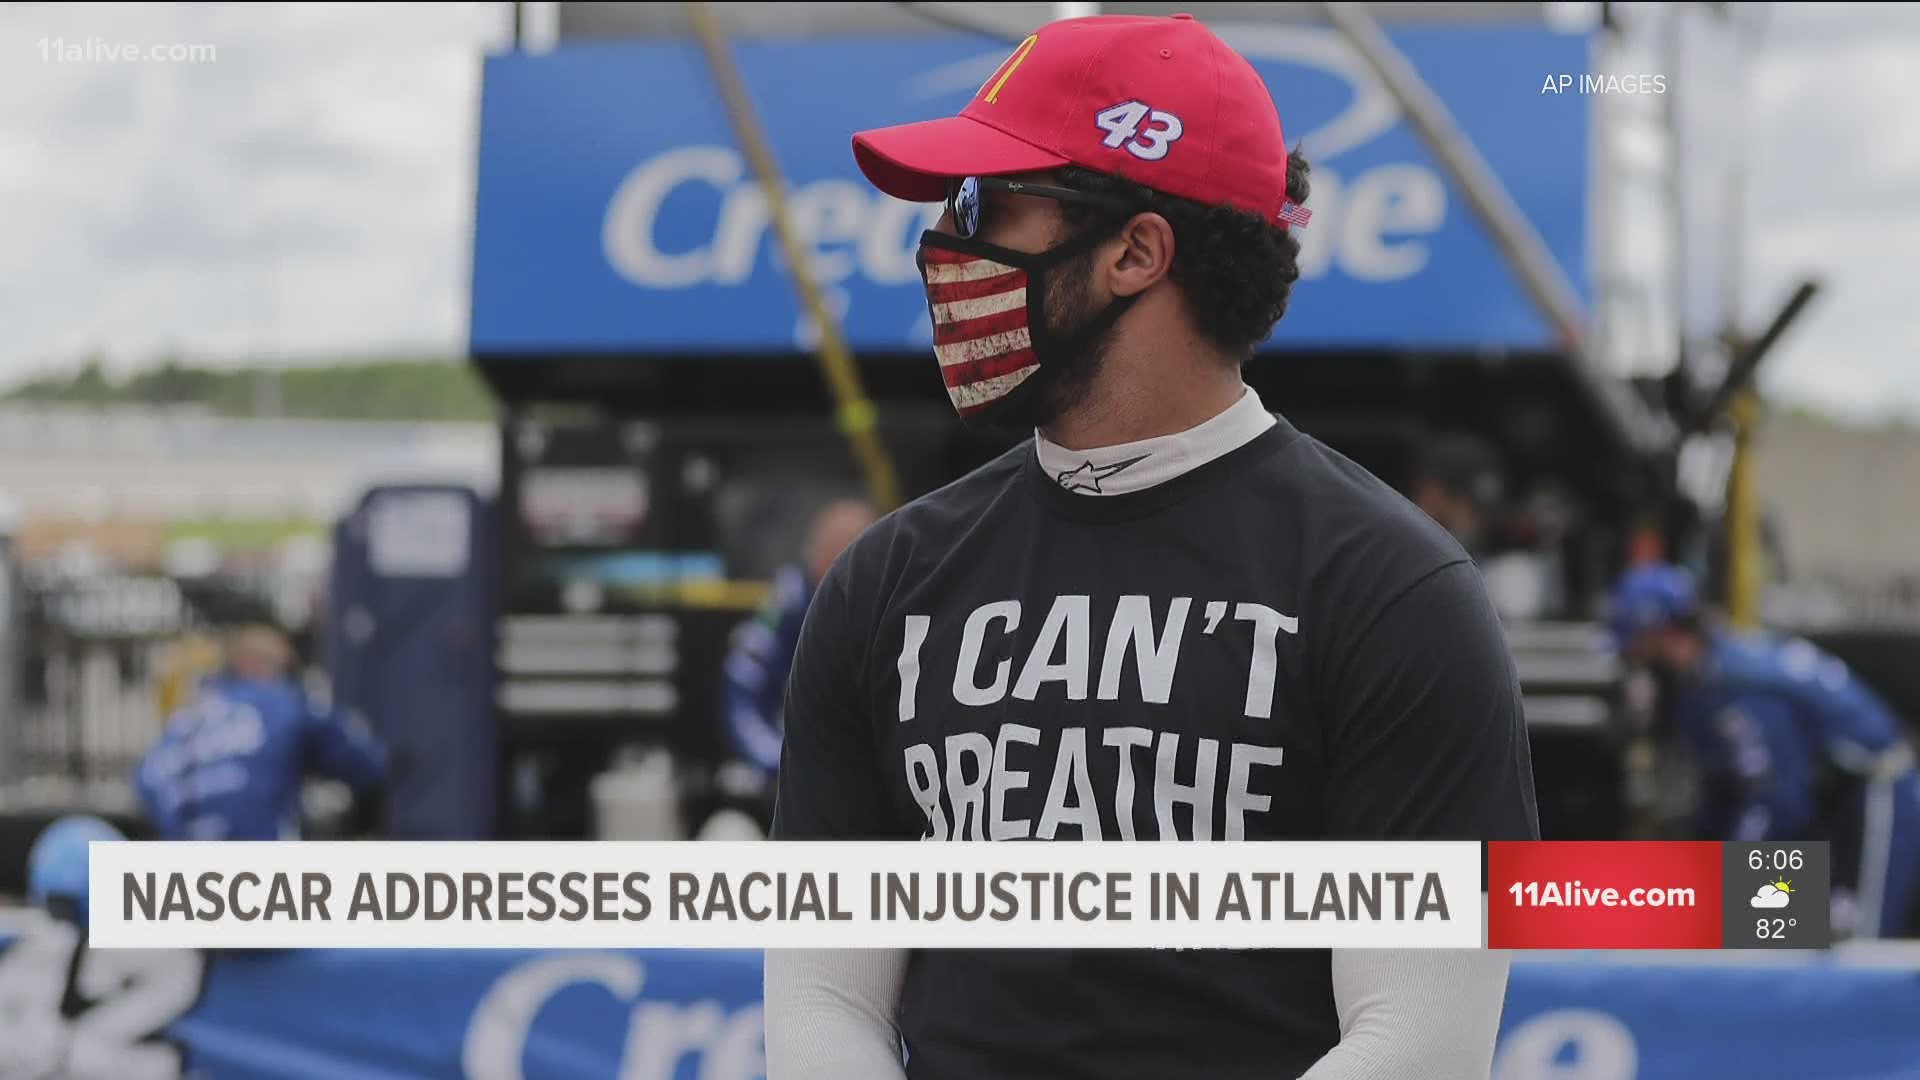 African American driver Bubba Wallace wore an 'I can't breath' shirt and also a NASCAR official took a knee.